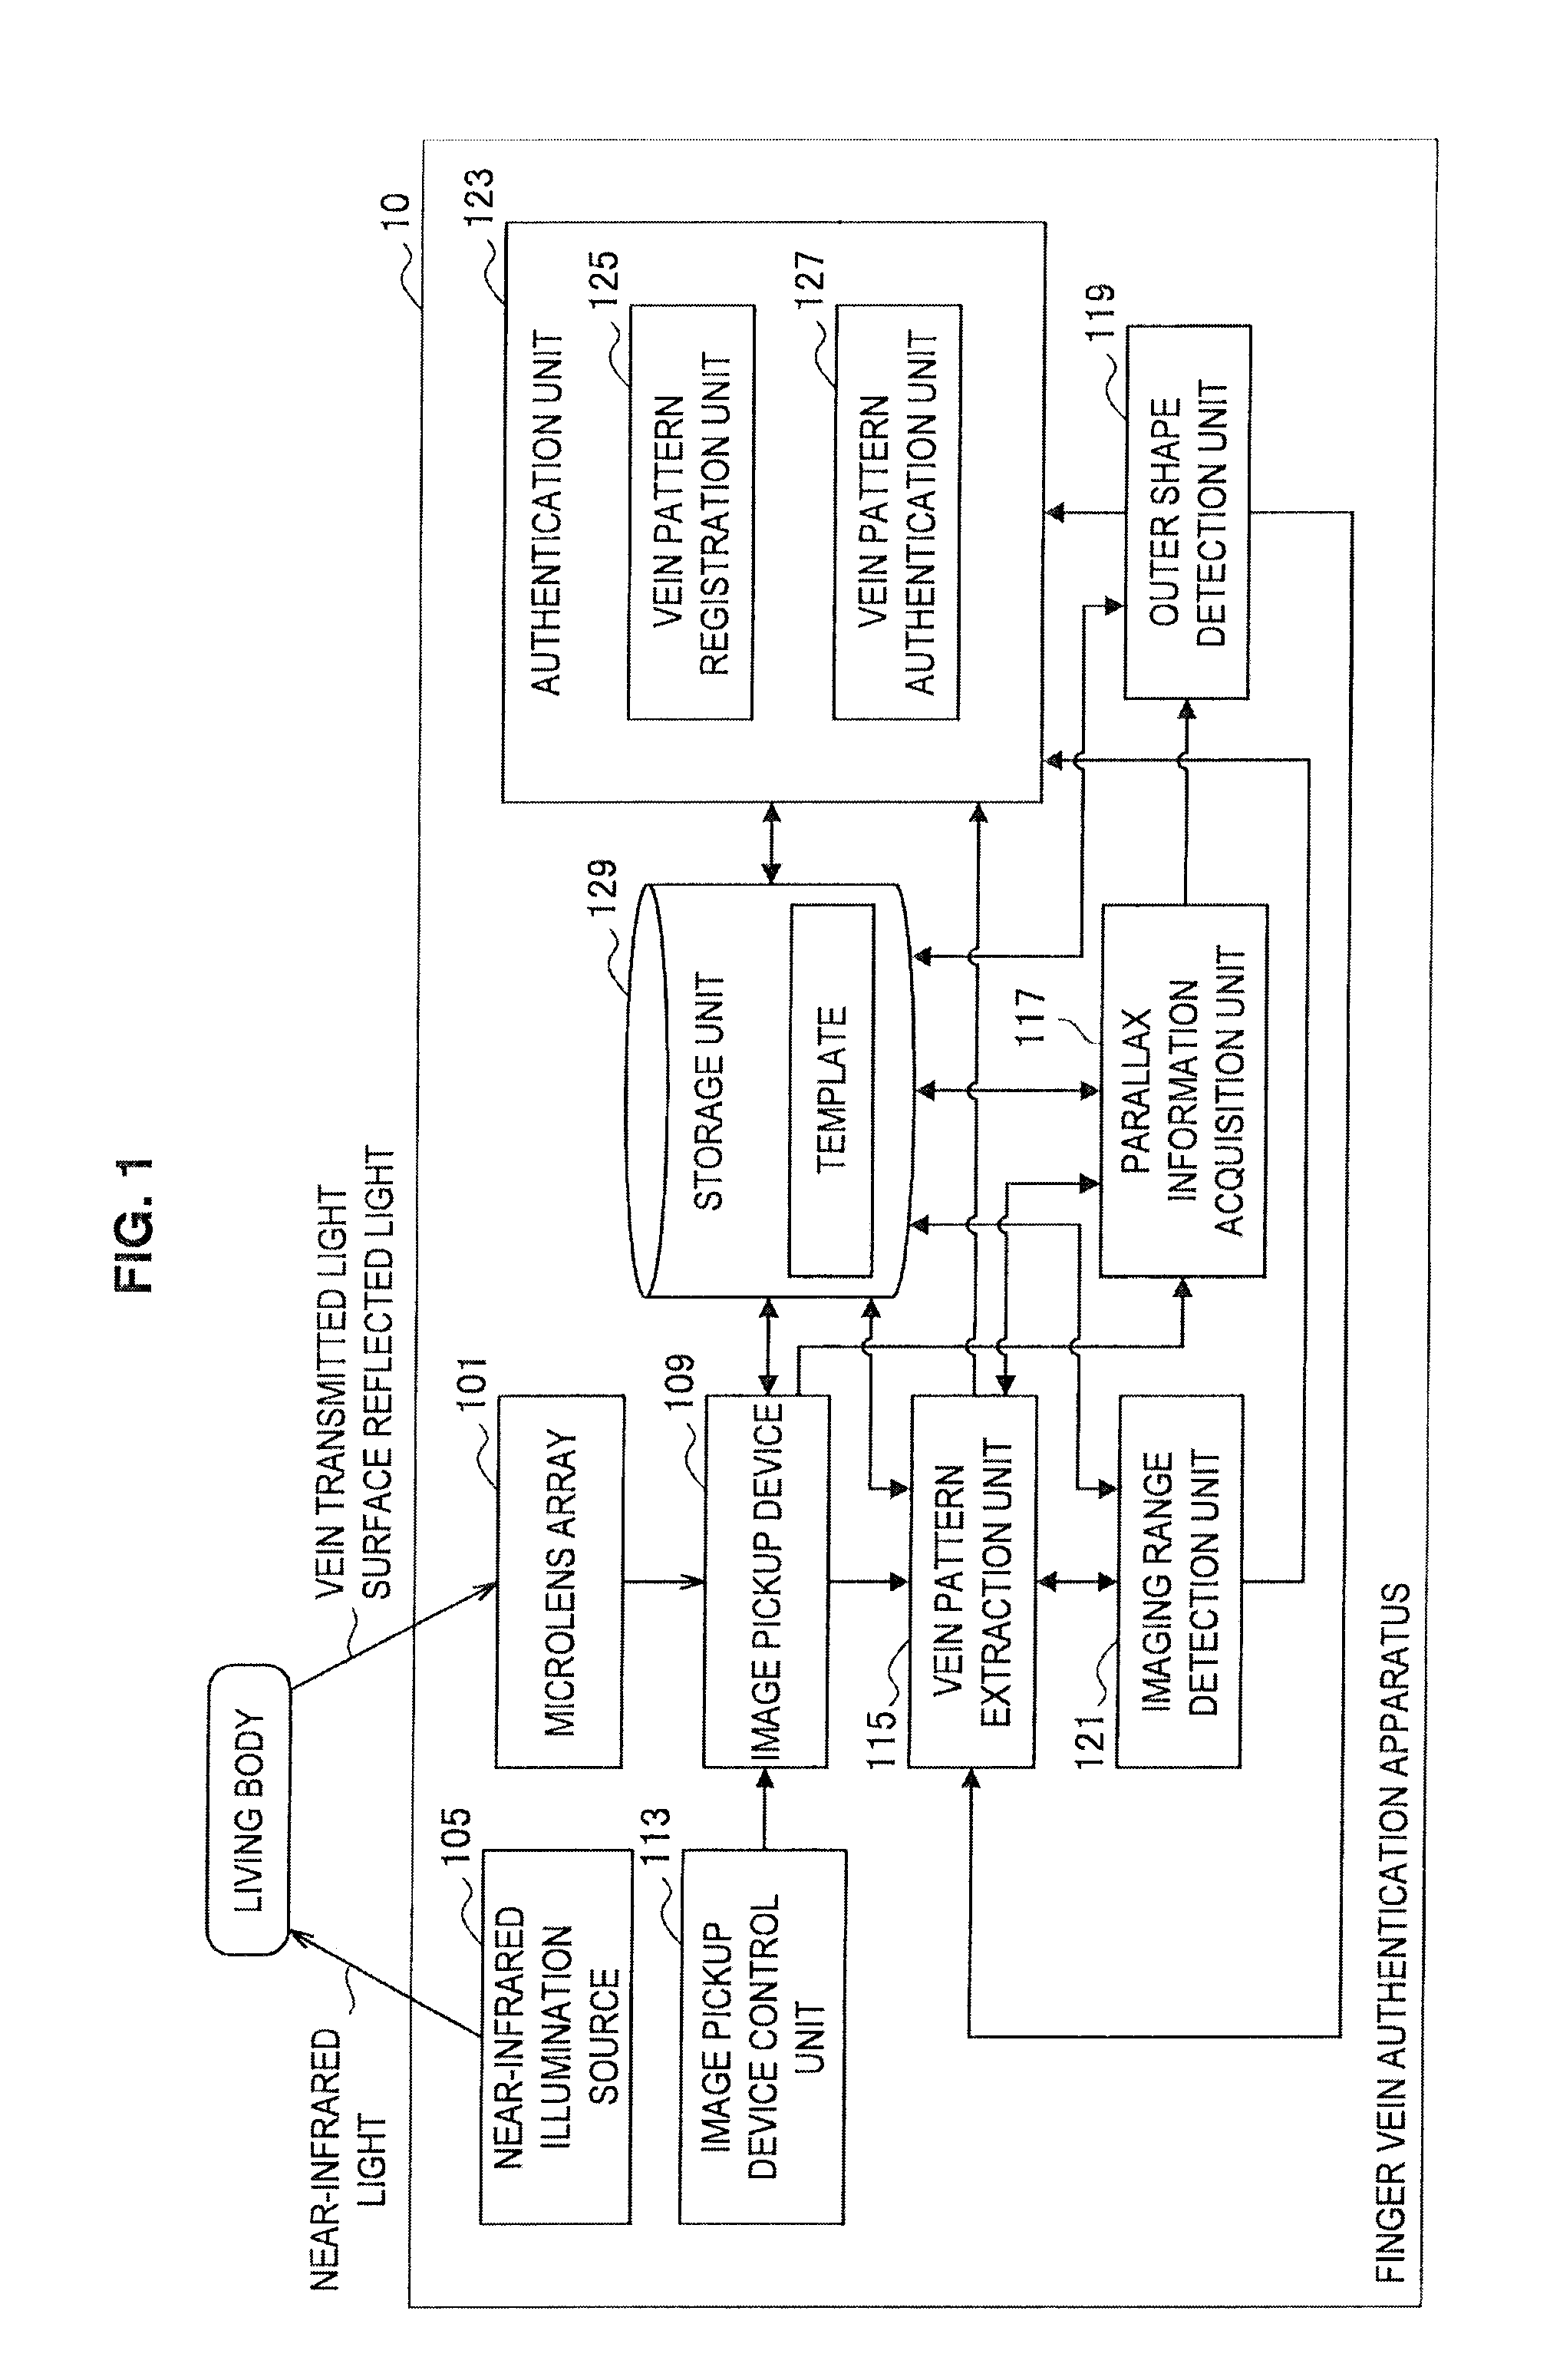 Finger Vein Authentication Apparatus and Finger Vein Authentication Method